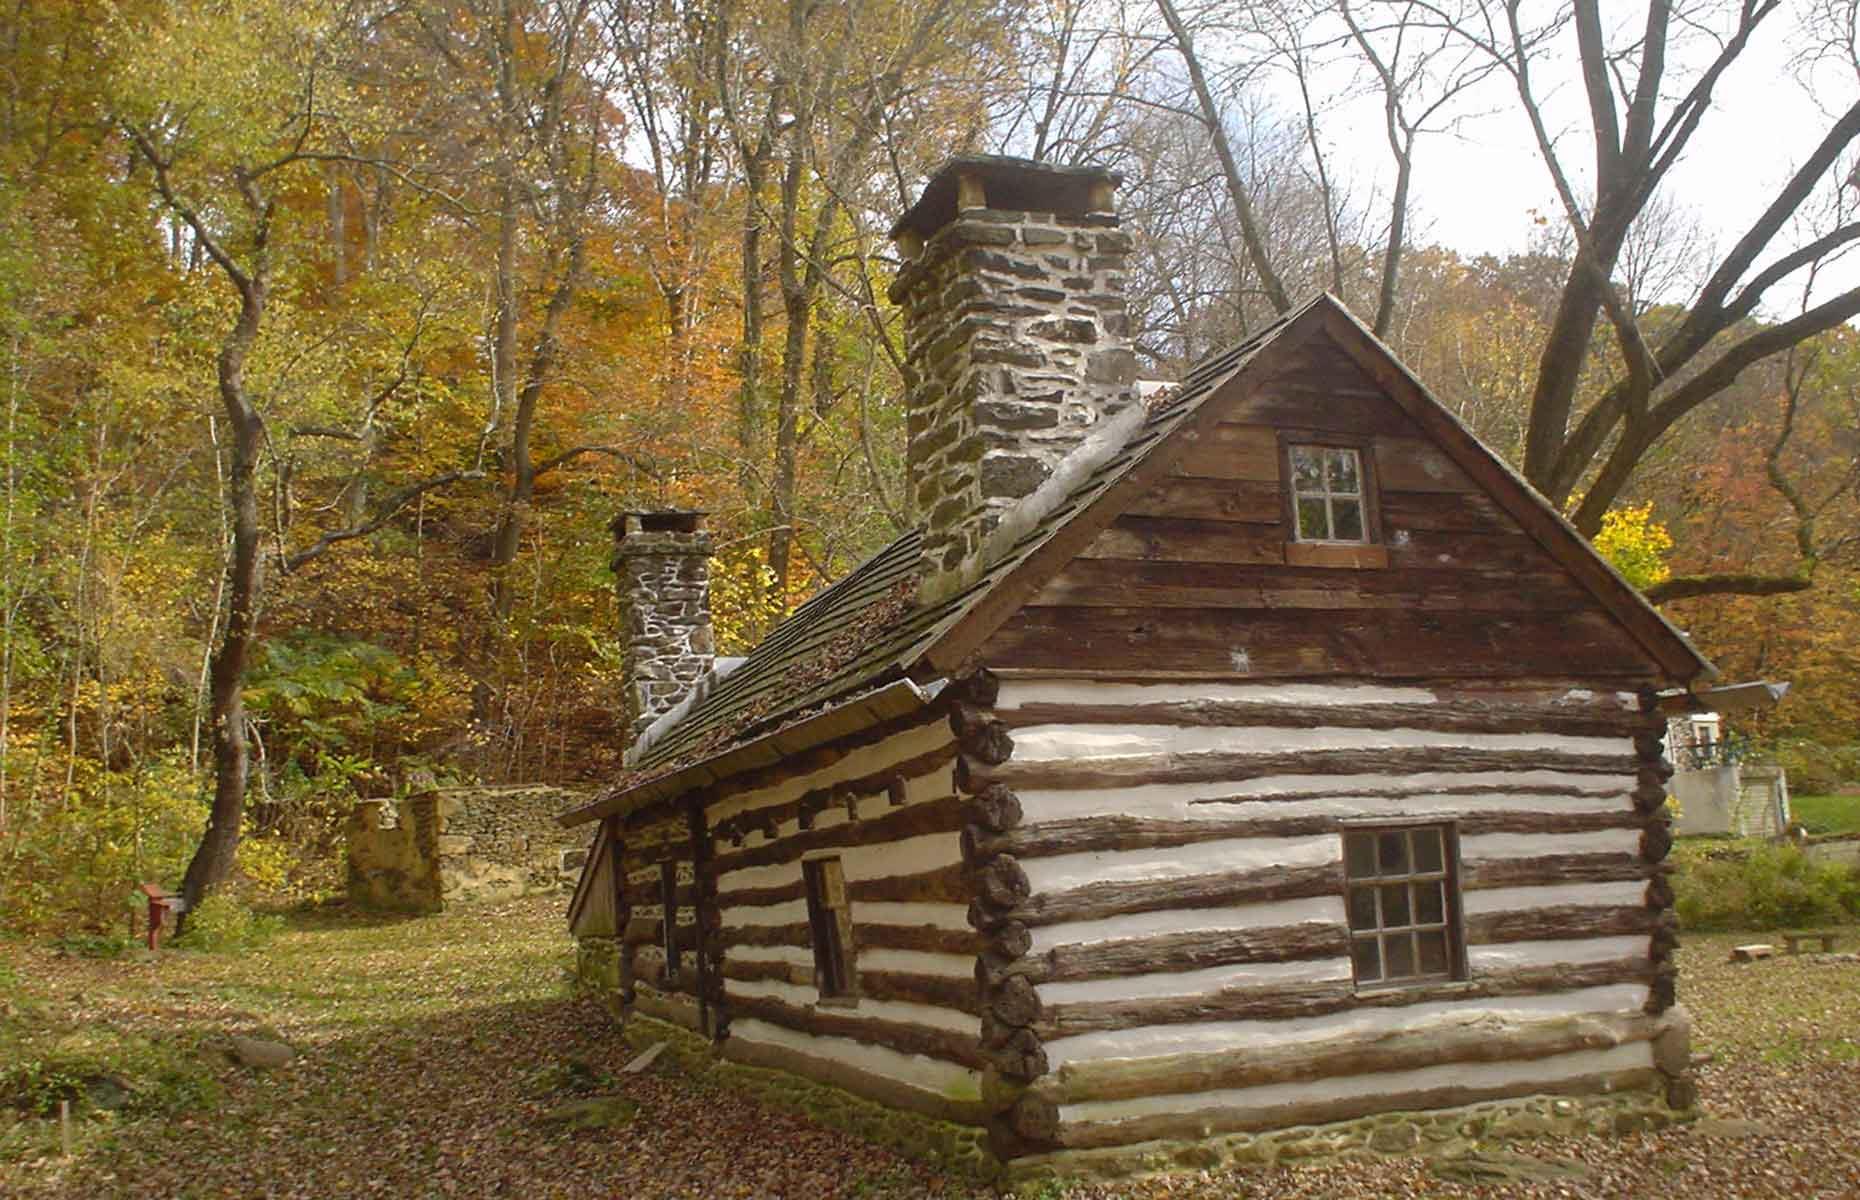 <p>You’ll feel like you’ve stepped back in time when you visit the <a href="https://swedishcabin.info/?page_id=2">Lower Swedish Cabin</a> in Drexel Hill, which looks much the same as it did when it was built by Swedish settlers between the 1630s and 1650s. The wooden timber structure served <a href="https://www.atlasobscura.com/places/the-lower-swedish-cabin-upper-darby-pennsylvania">as a trading post</a> used by the Swedish colony and the local Native Americans to exchange tools, beads and furs. It was fully restored in 1987 and a historical marker outside the property details its brief stint as a location for the film industry in the early-20th century.</p>